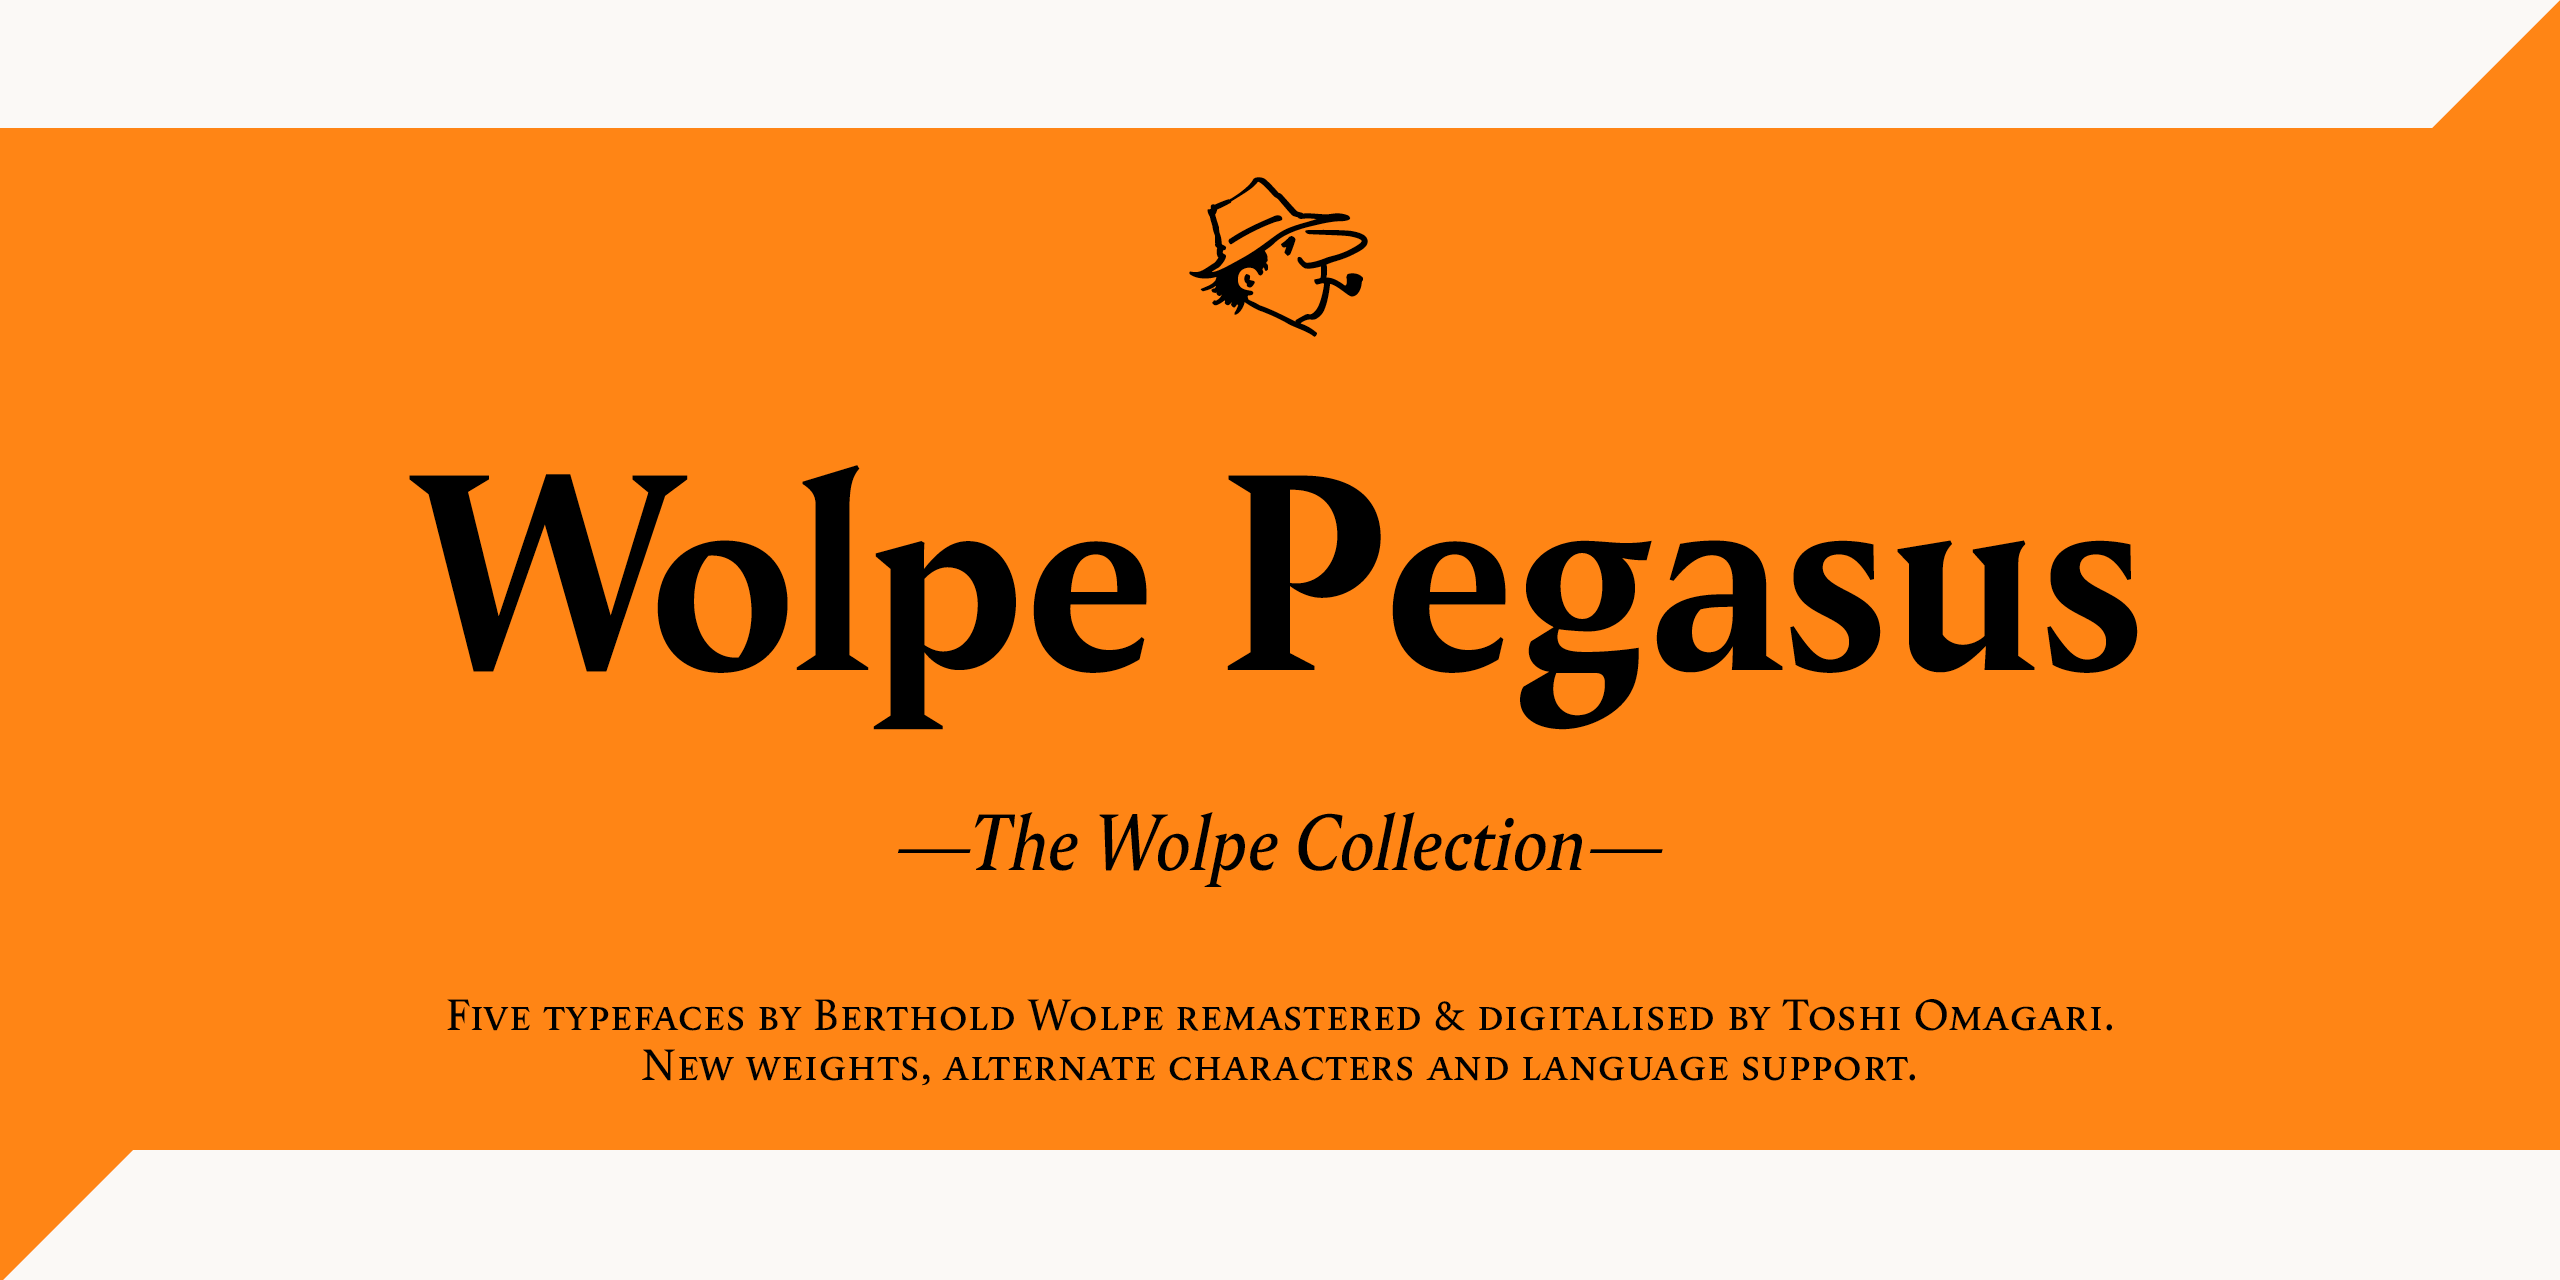 The Wolpe Collection – Wolpe Pegasus